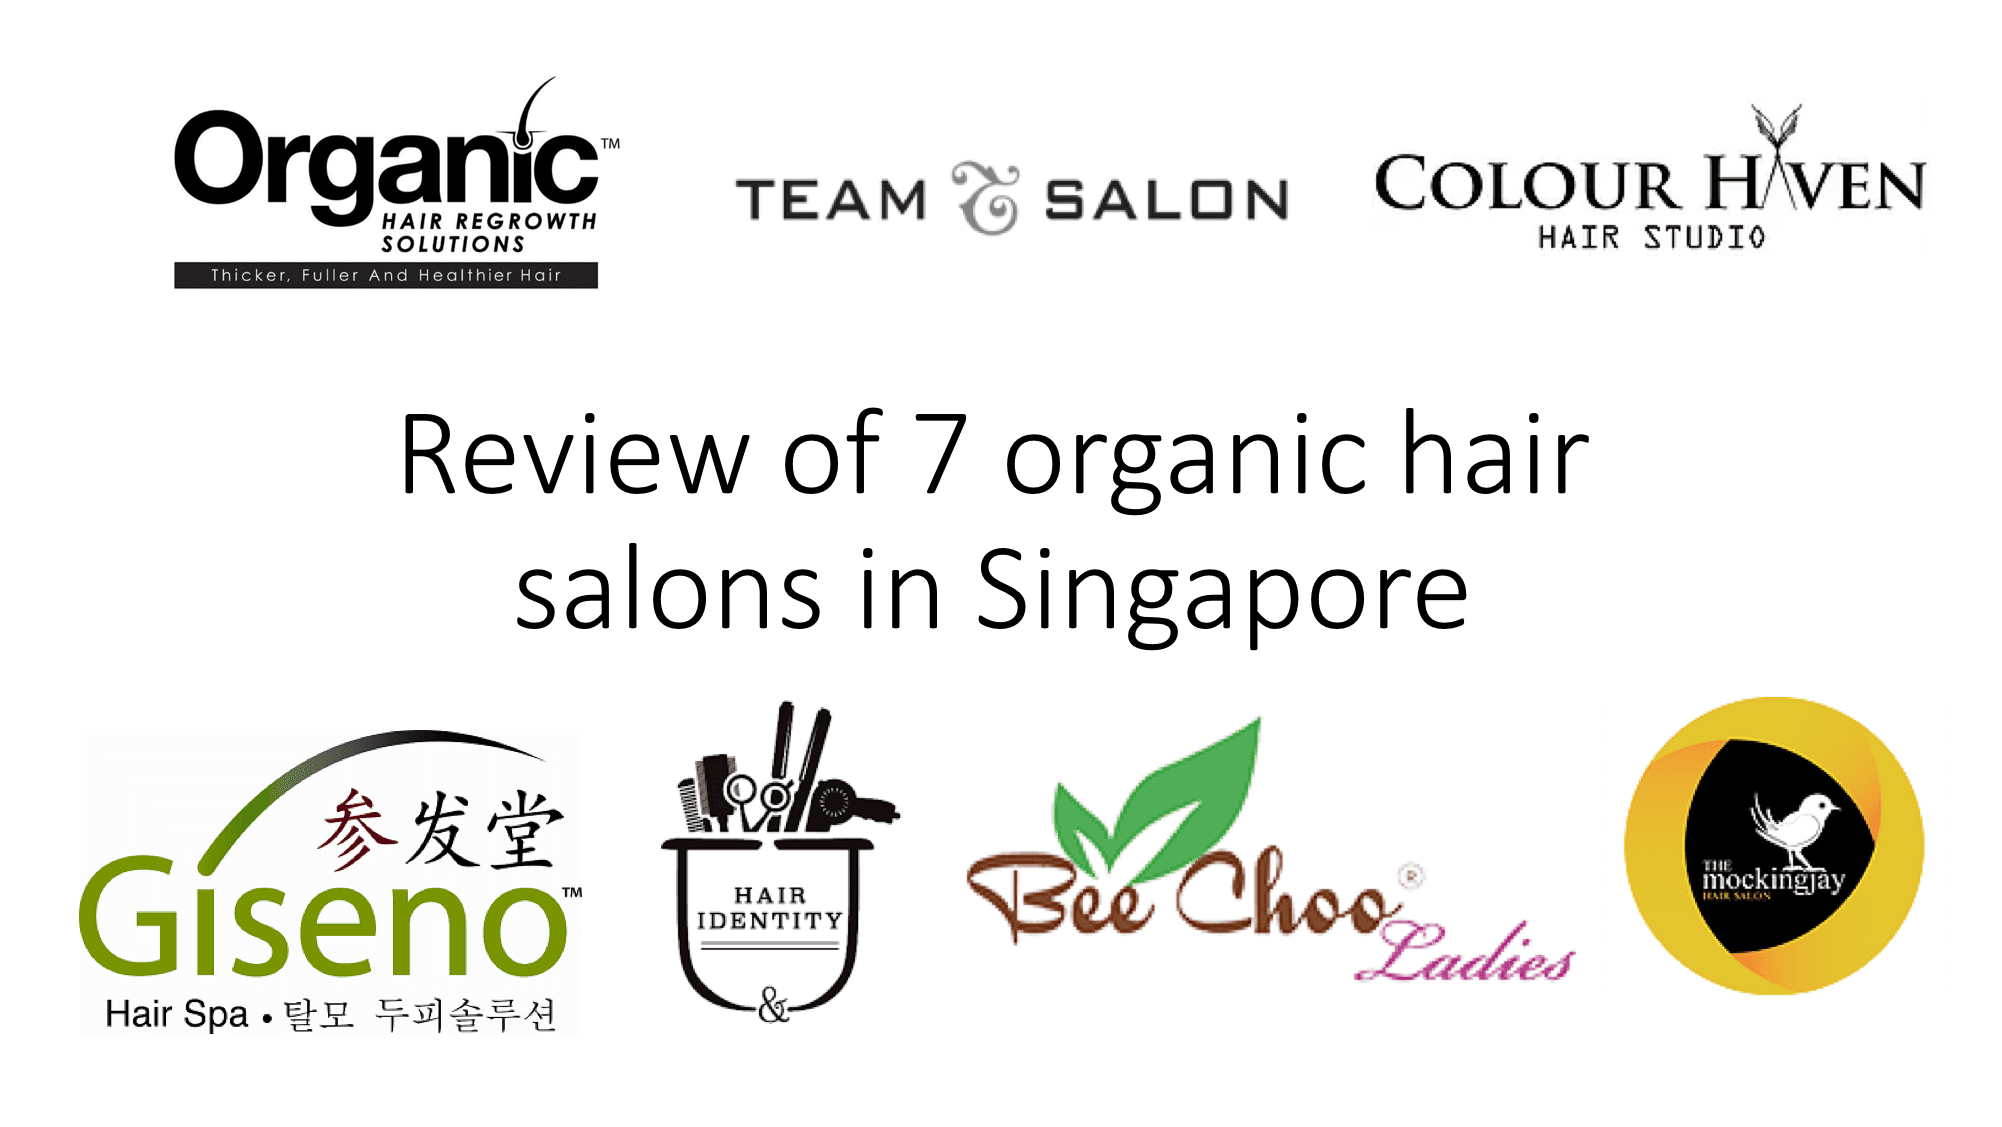 Review of 7 organic hair salons in Singapore